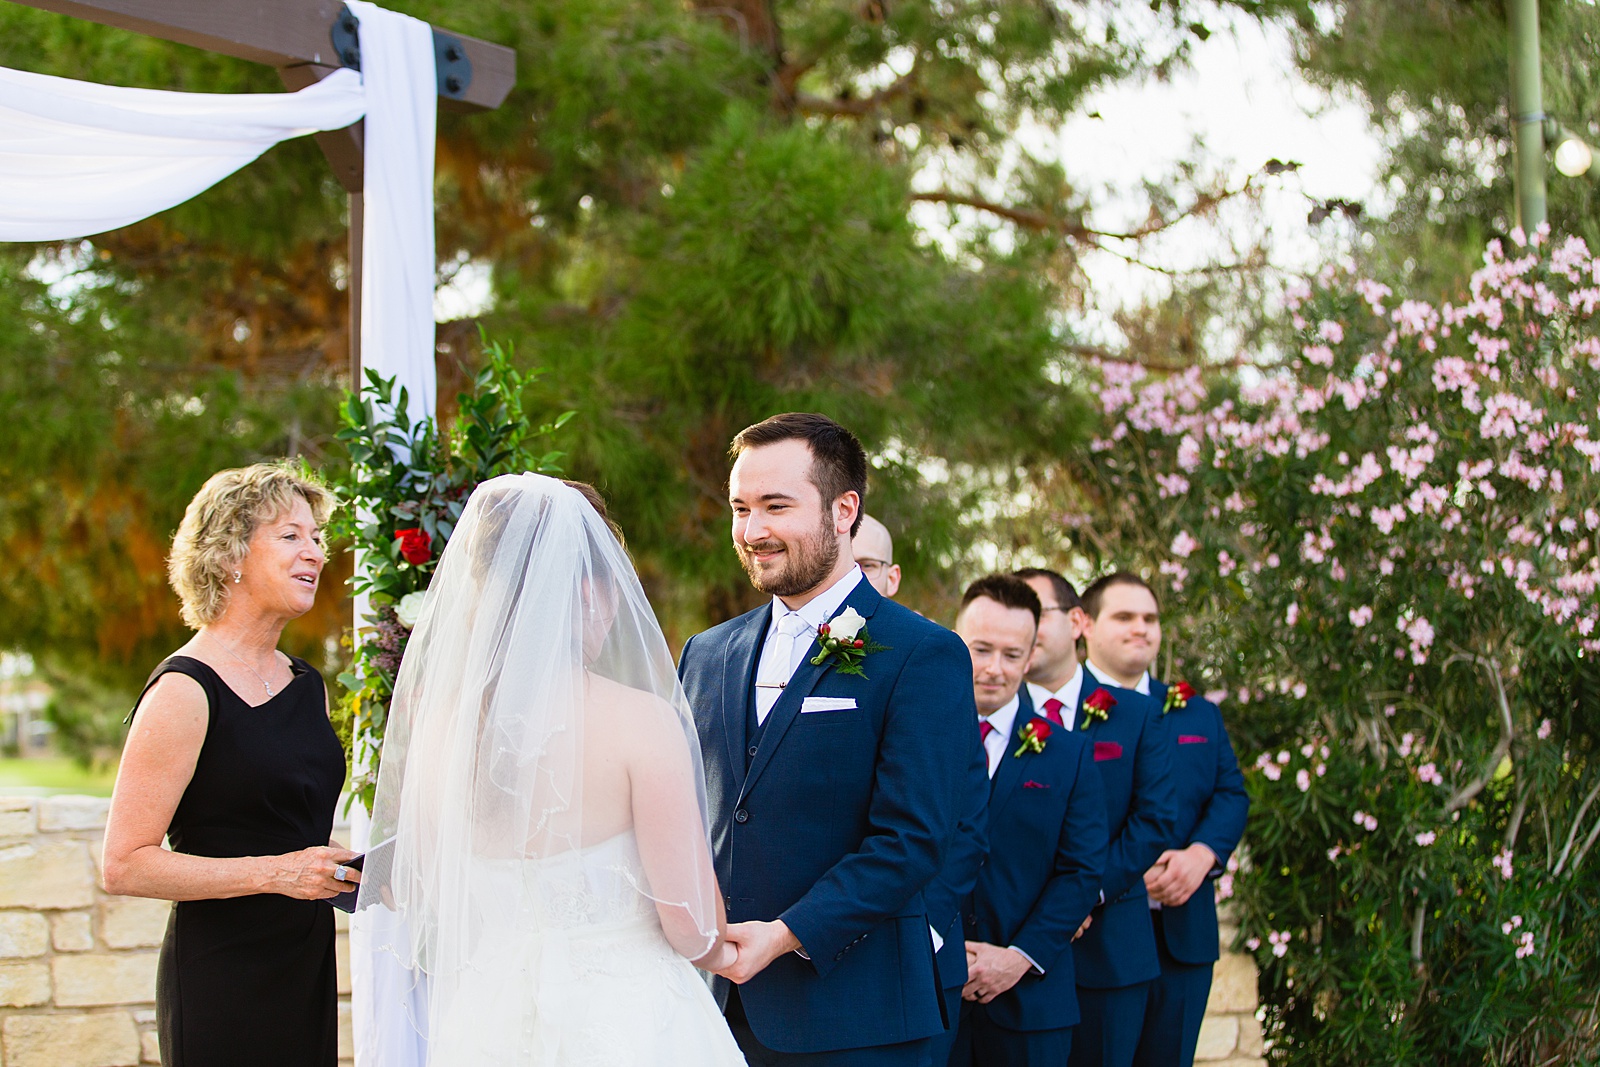 Groom looking at his bride during their wedding ceremony at Ocotillo Oasis by Phoenix wedding photographer PMA Photography.